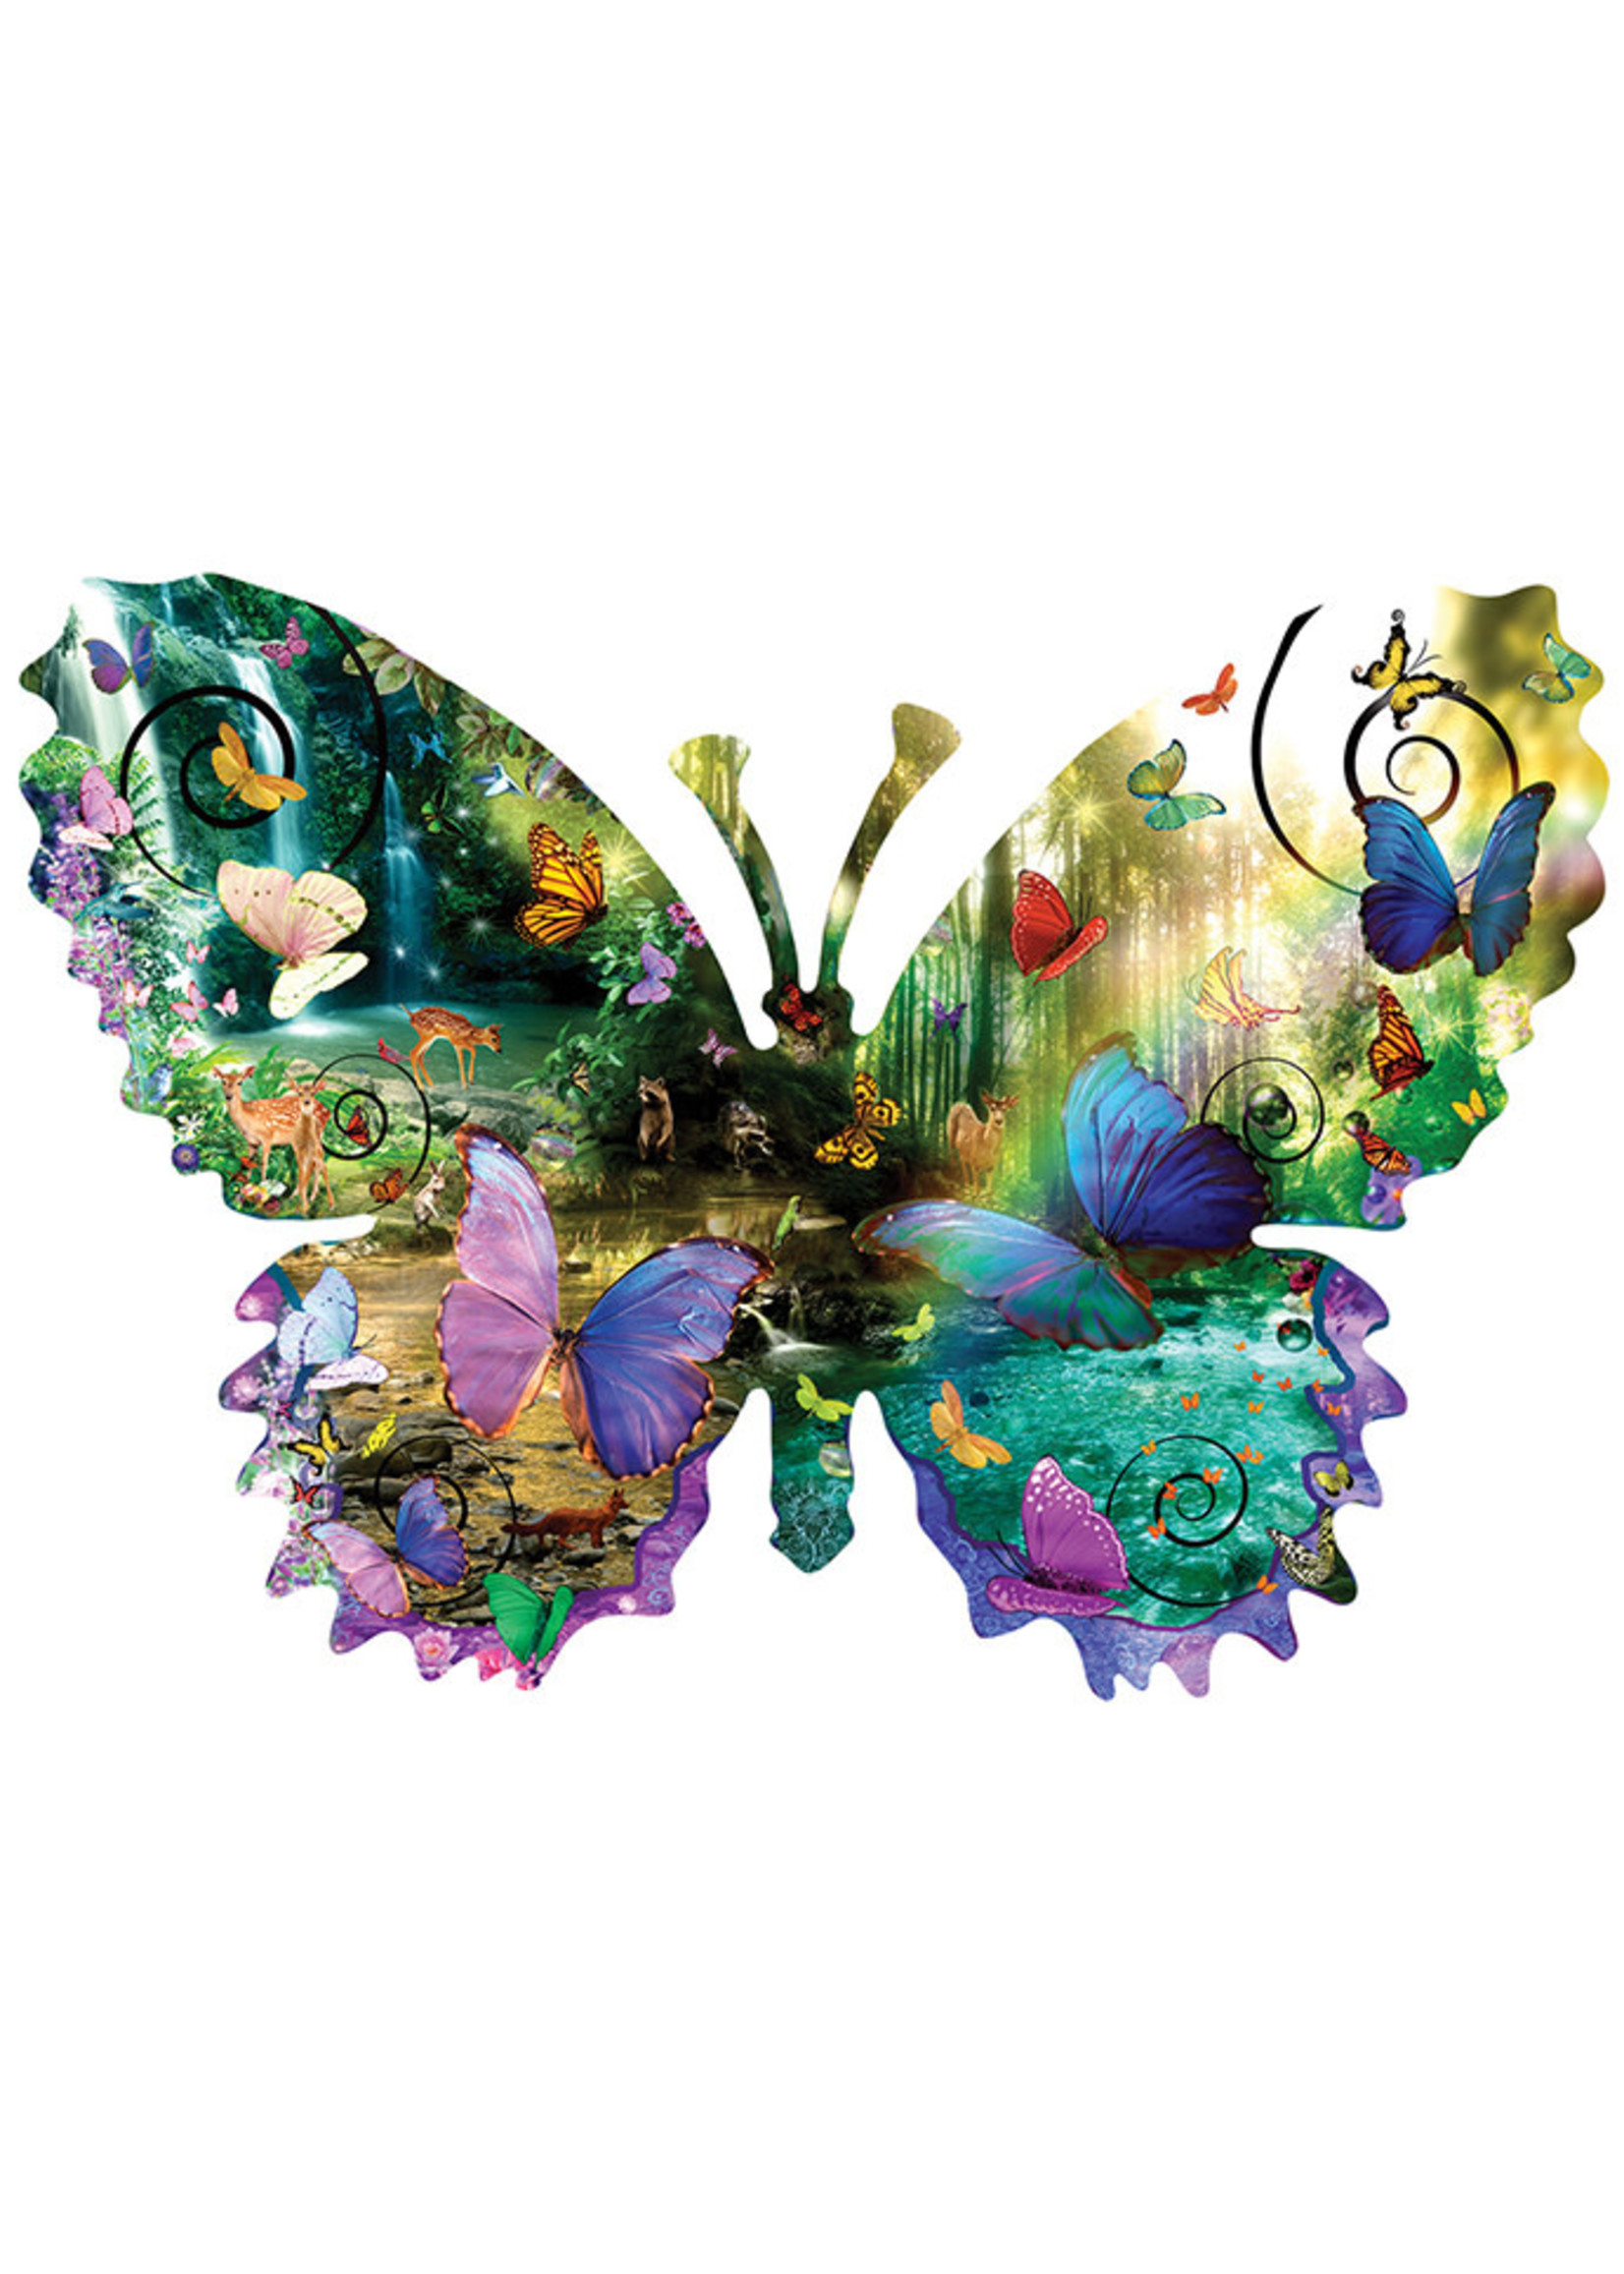 Sunsout Forest Butterfly Special Shaped Puzzle 1000 Pieces